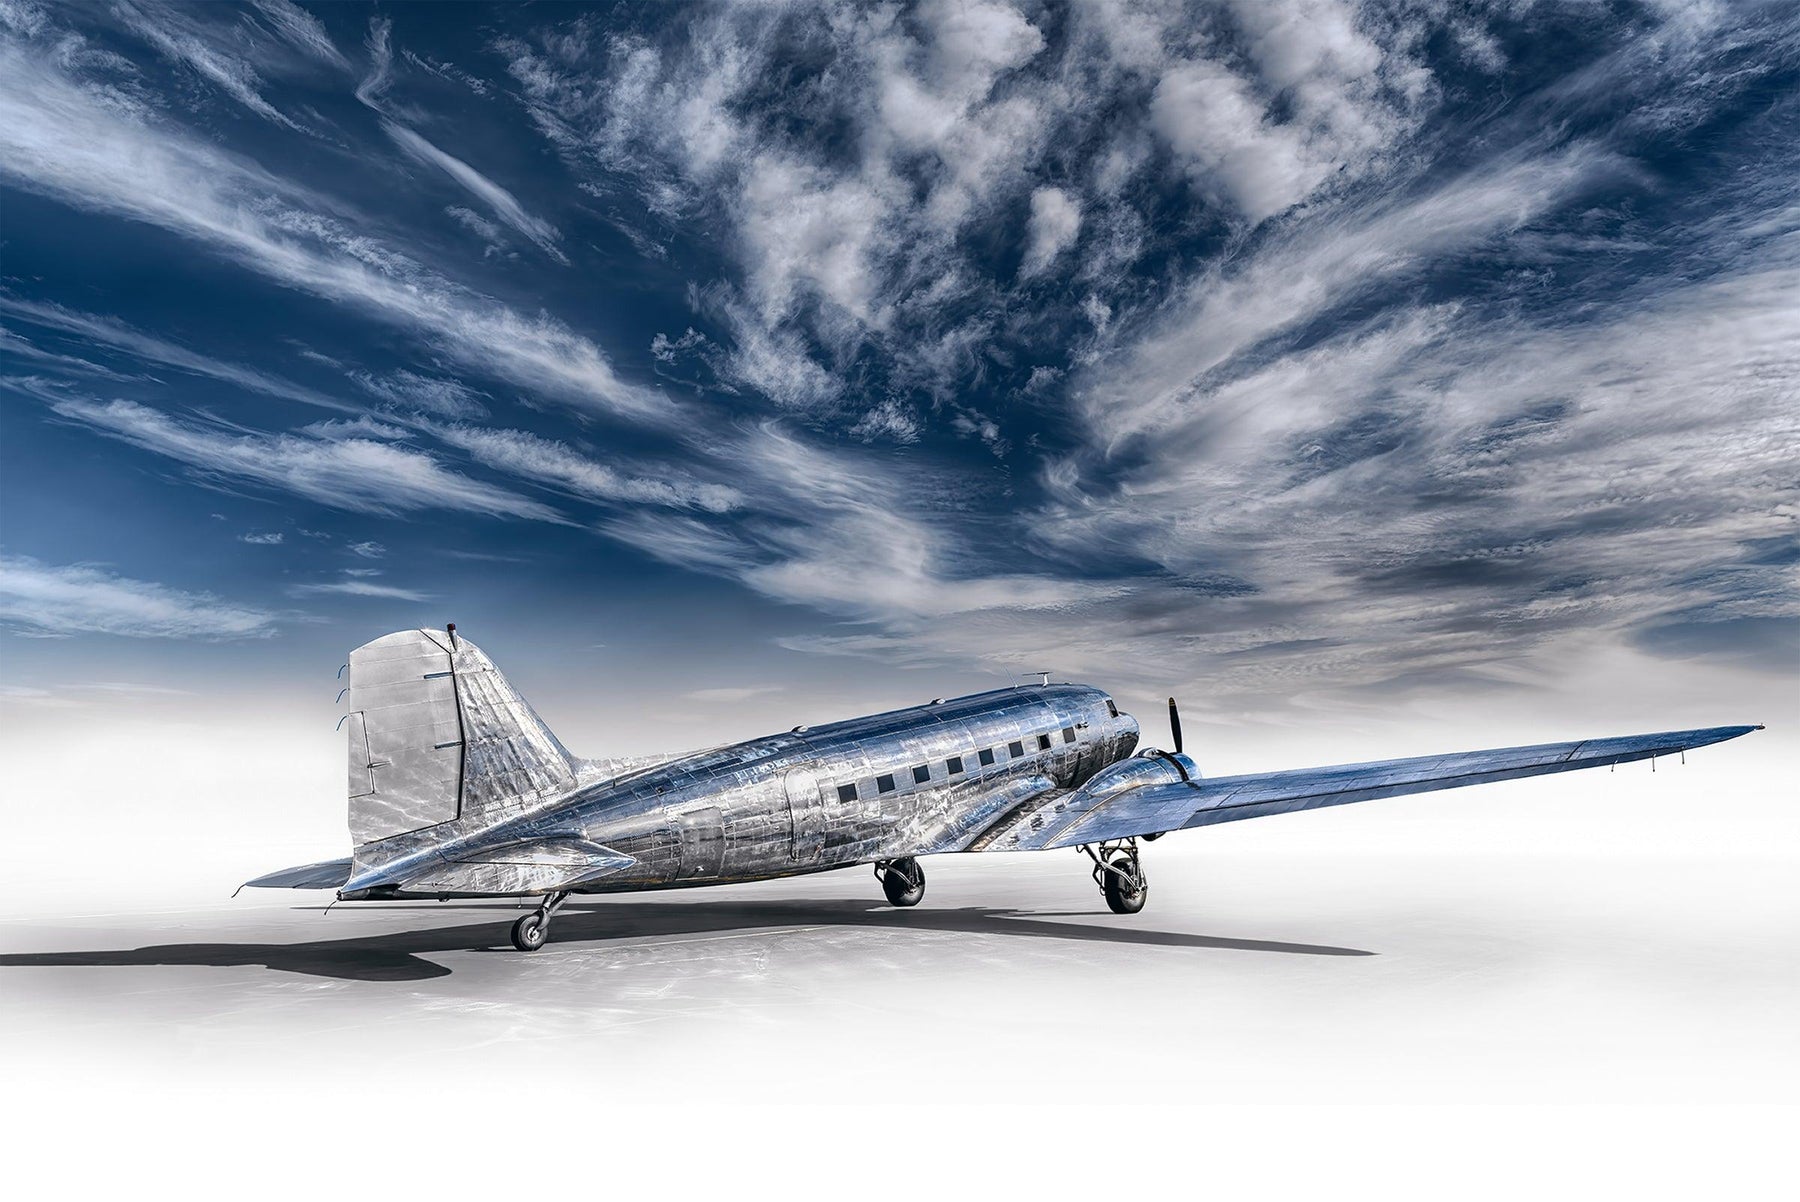 Silver DC-3 airplane with a white foreground and a cloudy blue sky above